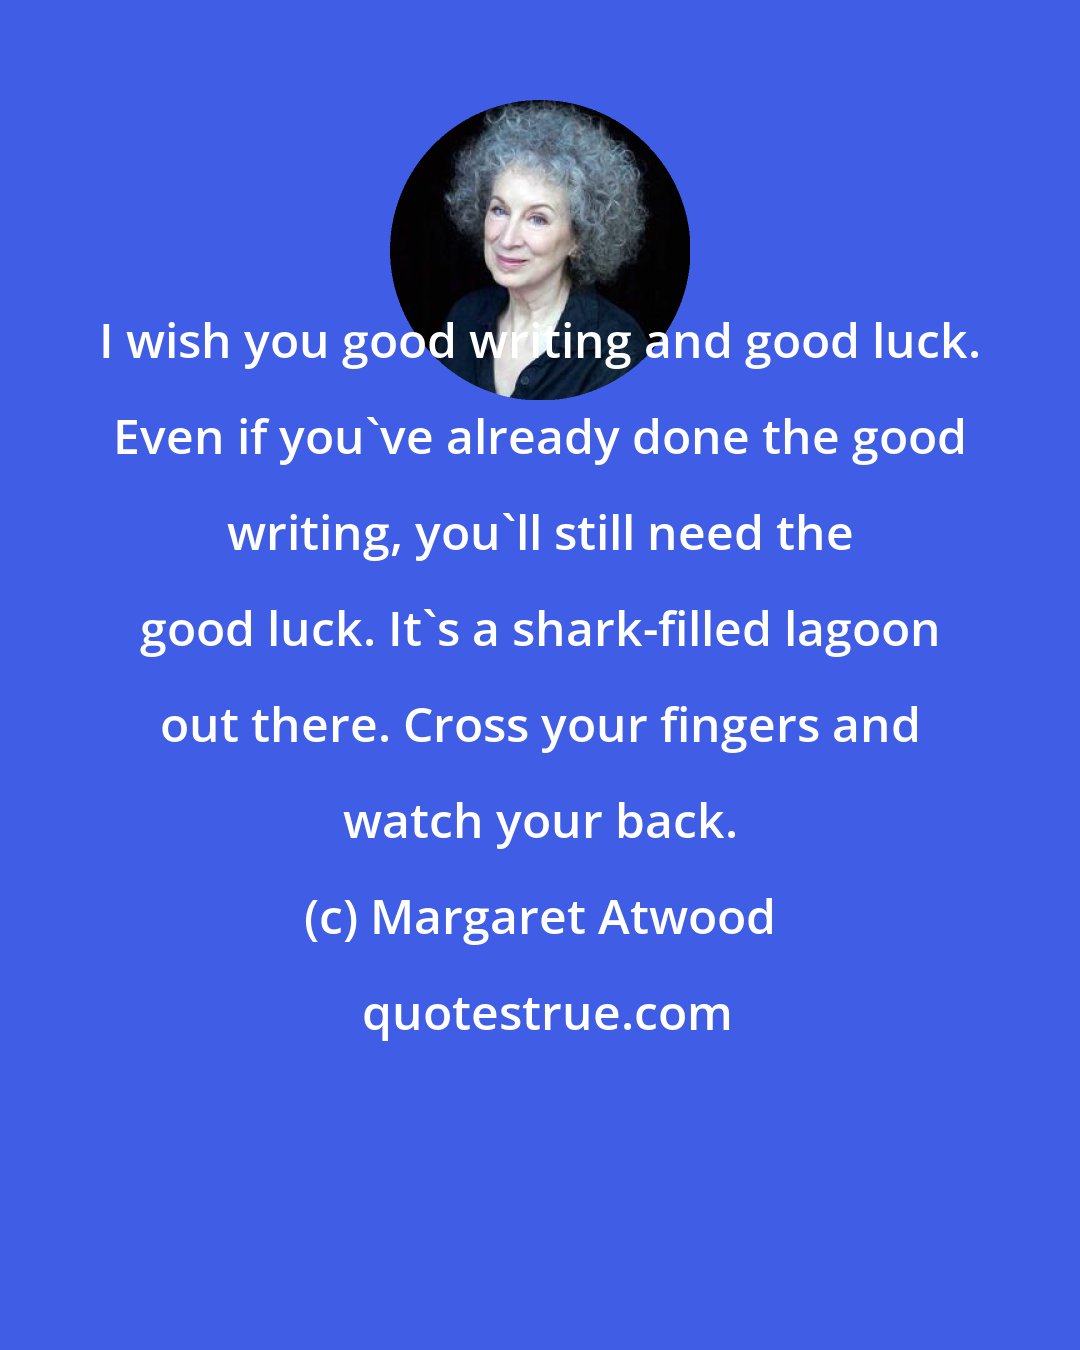 Margaret Atwood: I wish you good writing and good luck. Even if you've already done the good writing, you'll still need the good luck. It's a shark-filled lagoon out there. Cross your fingers and watch your back.